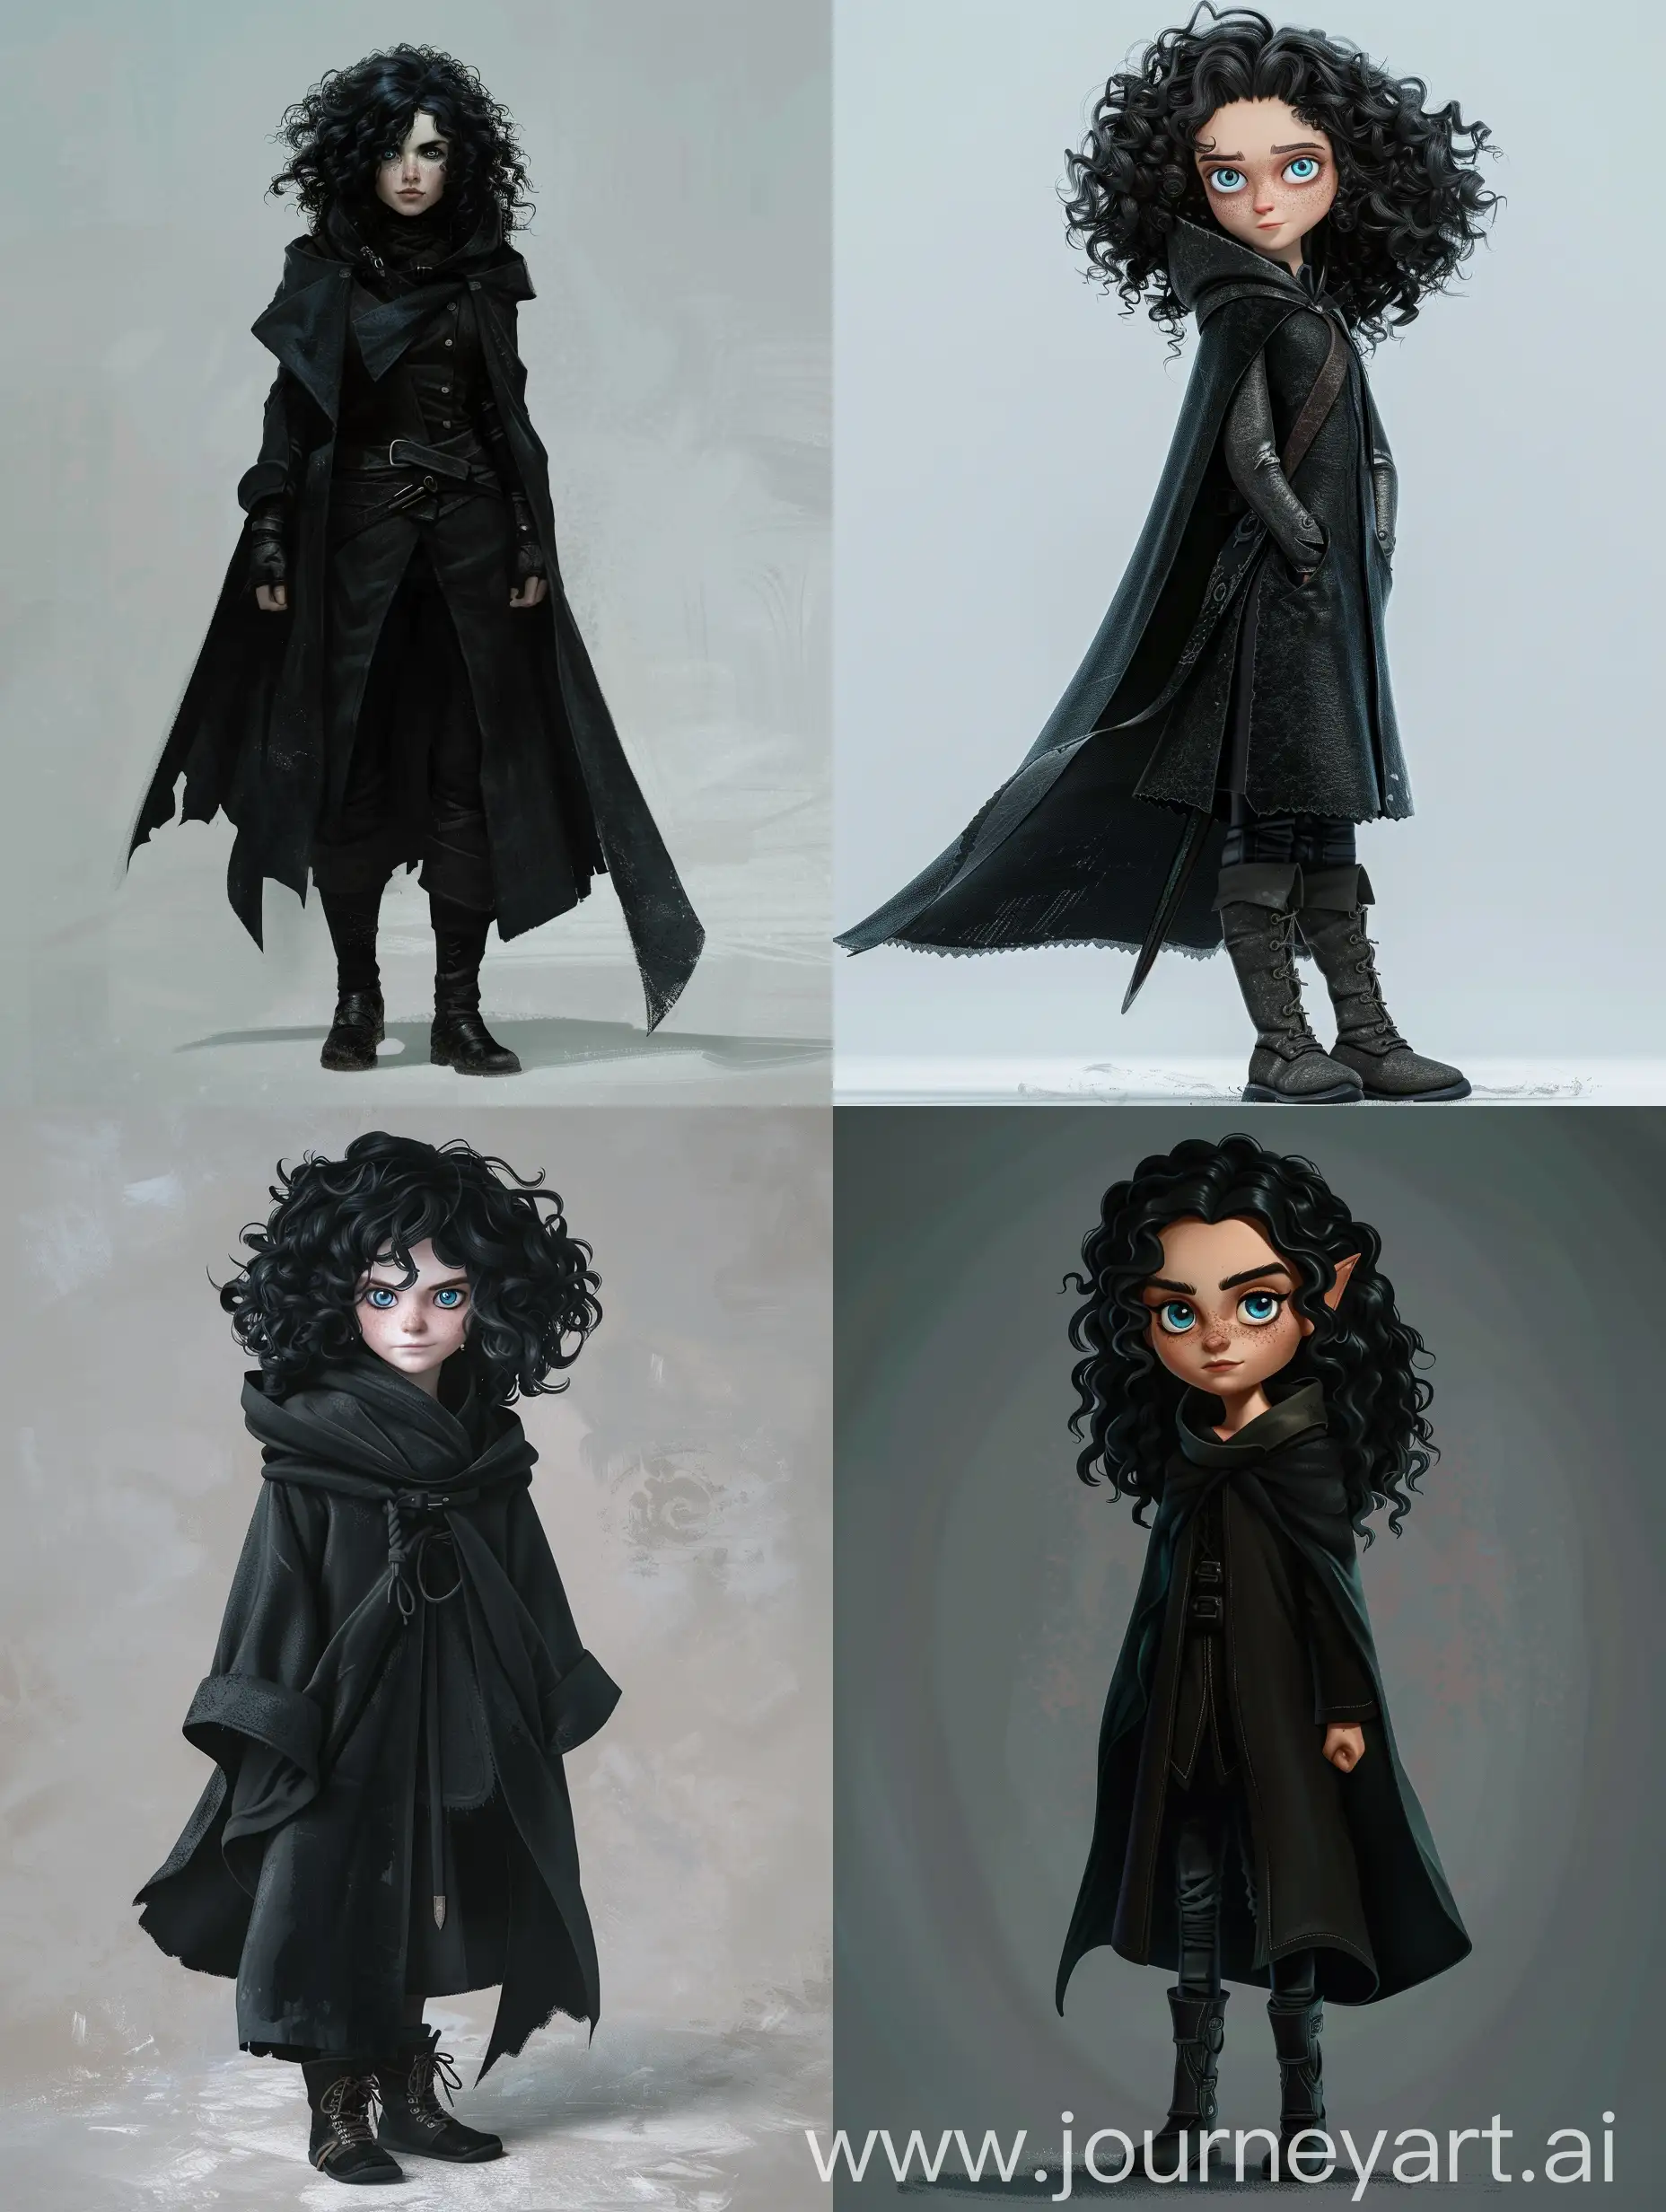 Sinister-Mage-Girl-with-Dark-Coat-and-Dominant-Smirk-in-Animated-Style